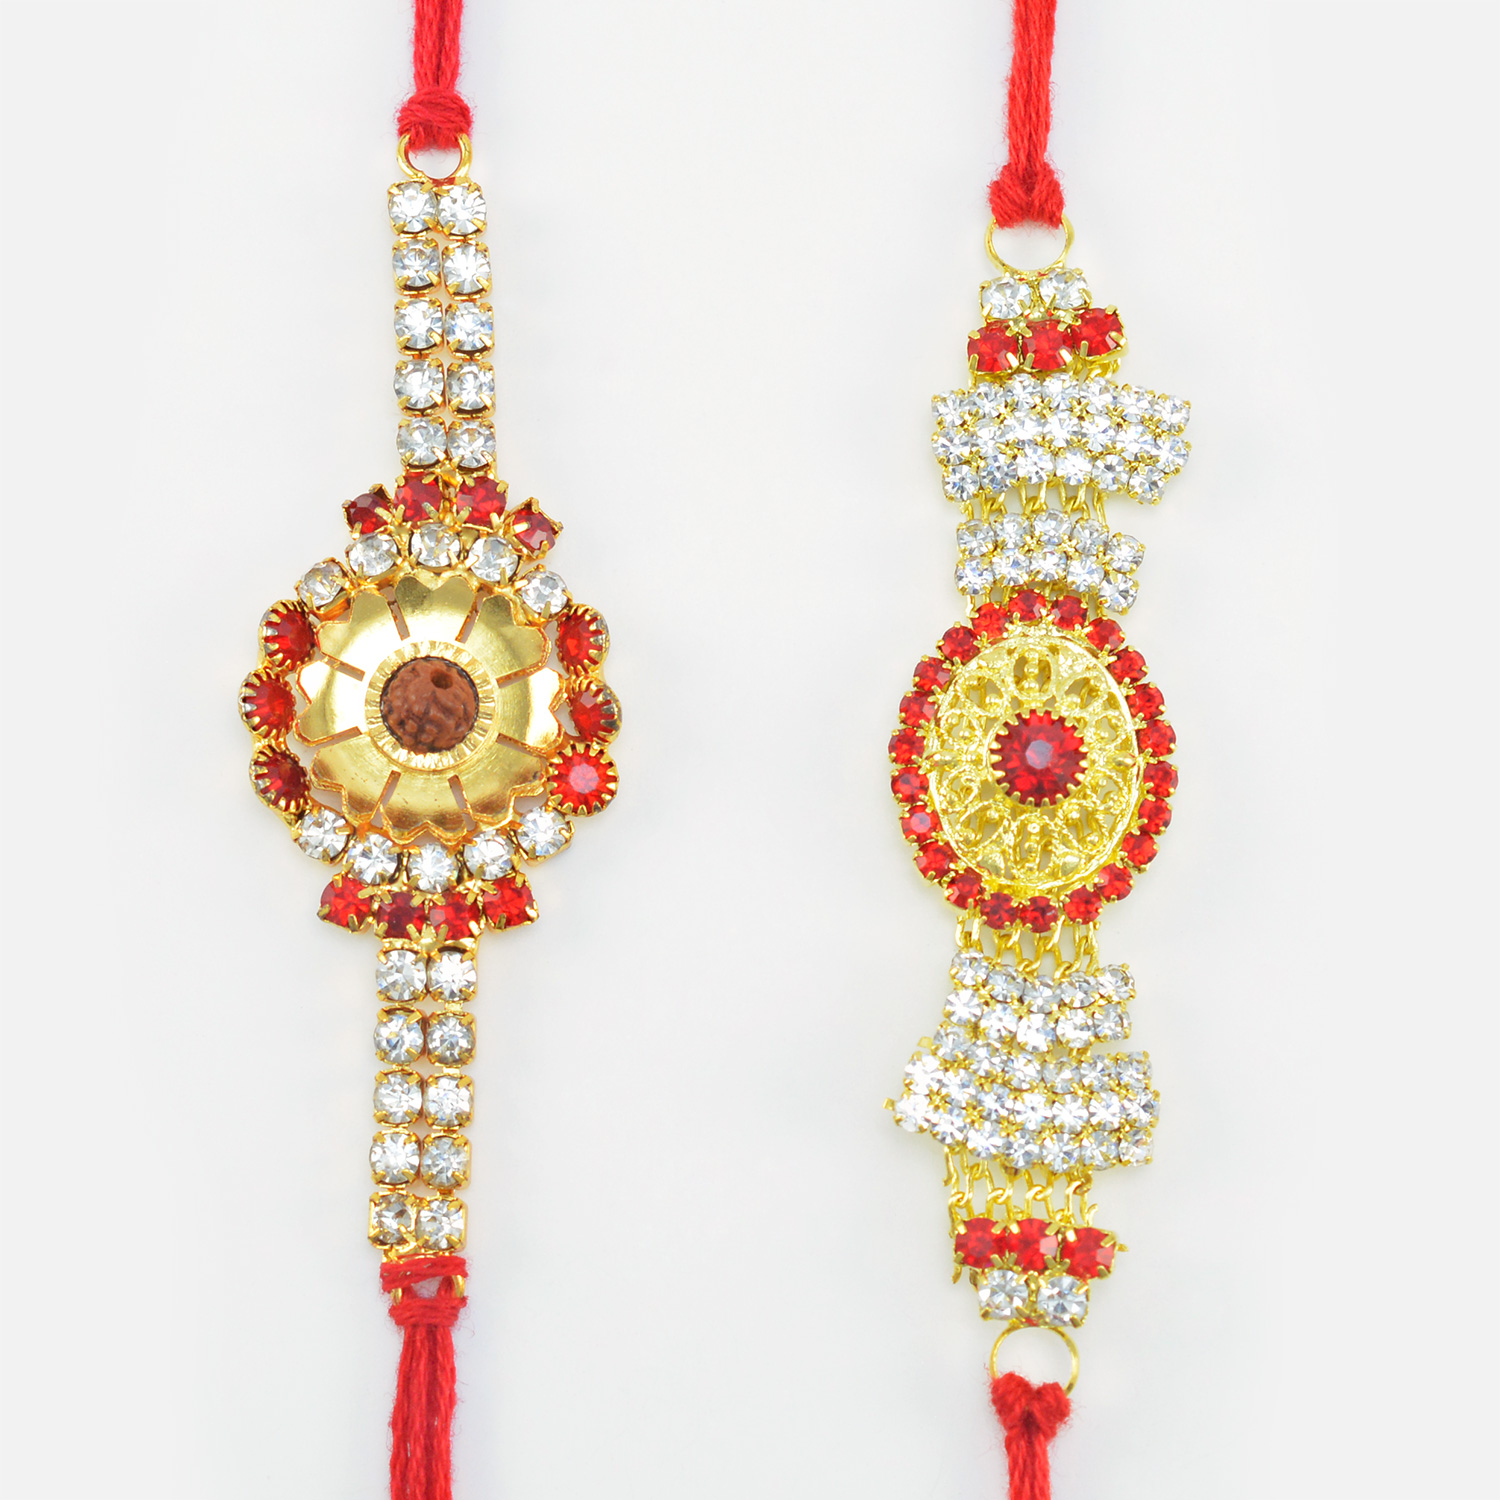 Golden Base in Mid Rounded with Colored Jewels Unique Set of 2 Jewel Brother Rakhis